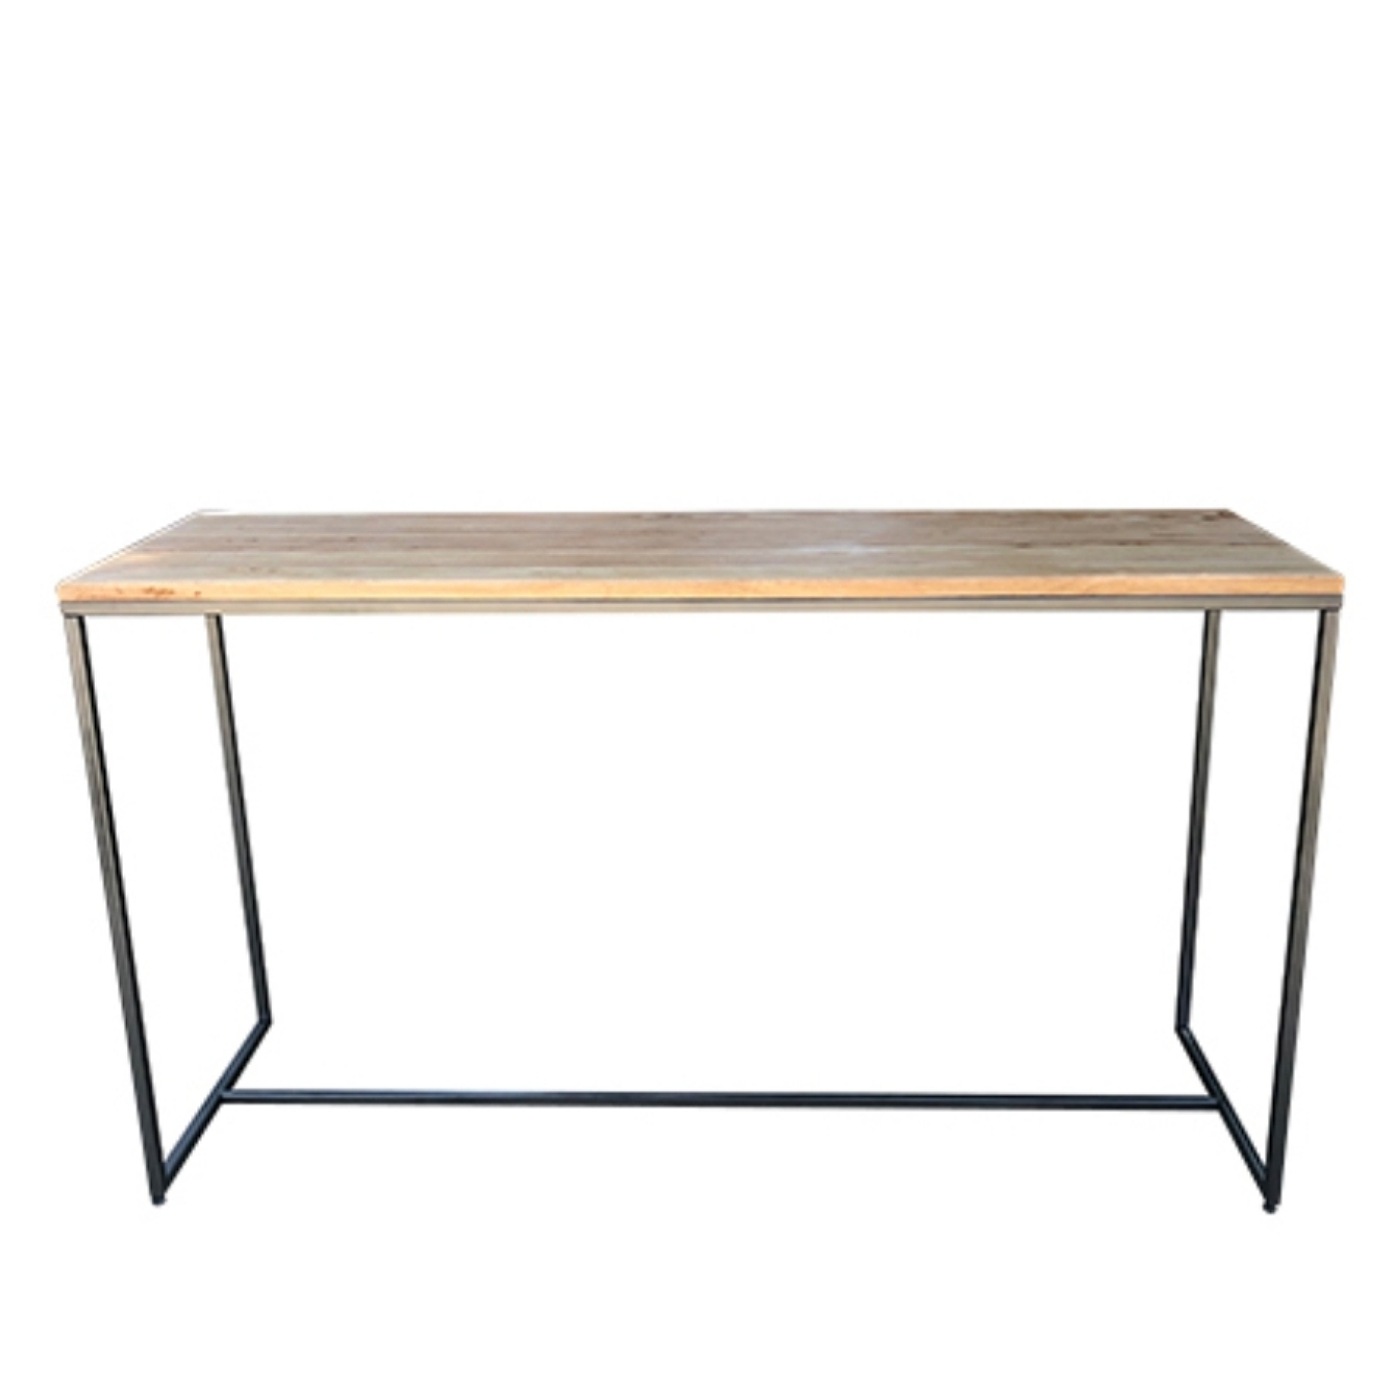 Rectangular Black Steel Frame Cocktail Table with Natural Wood Top.